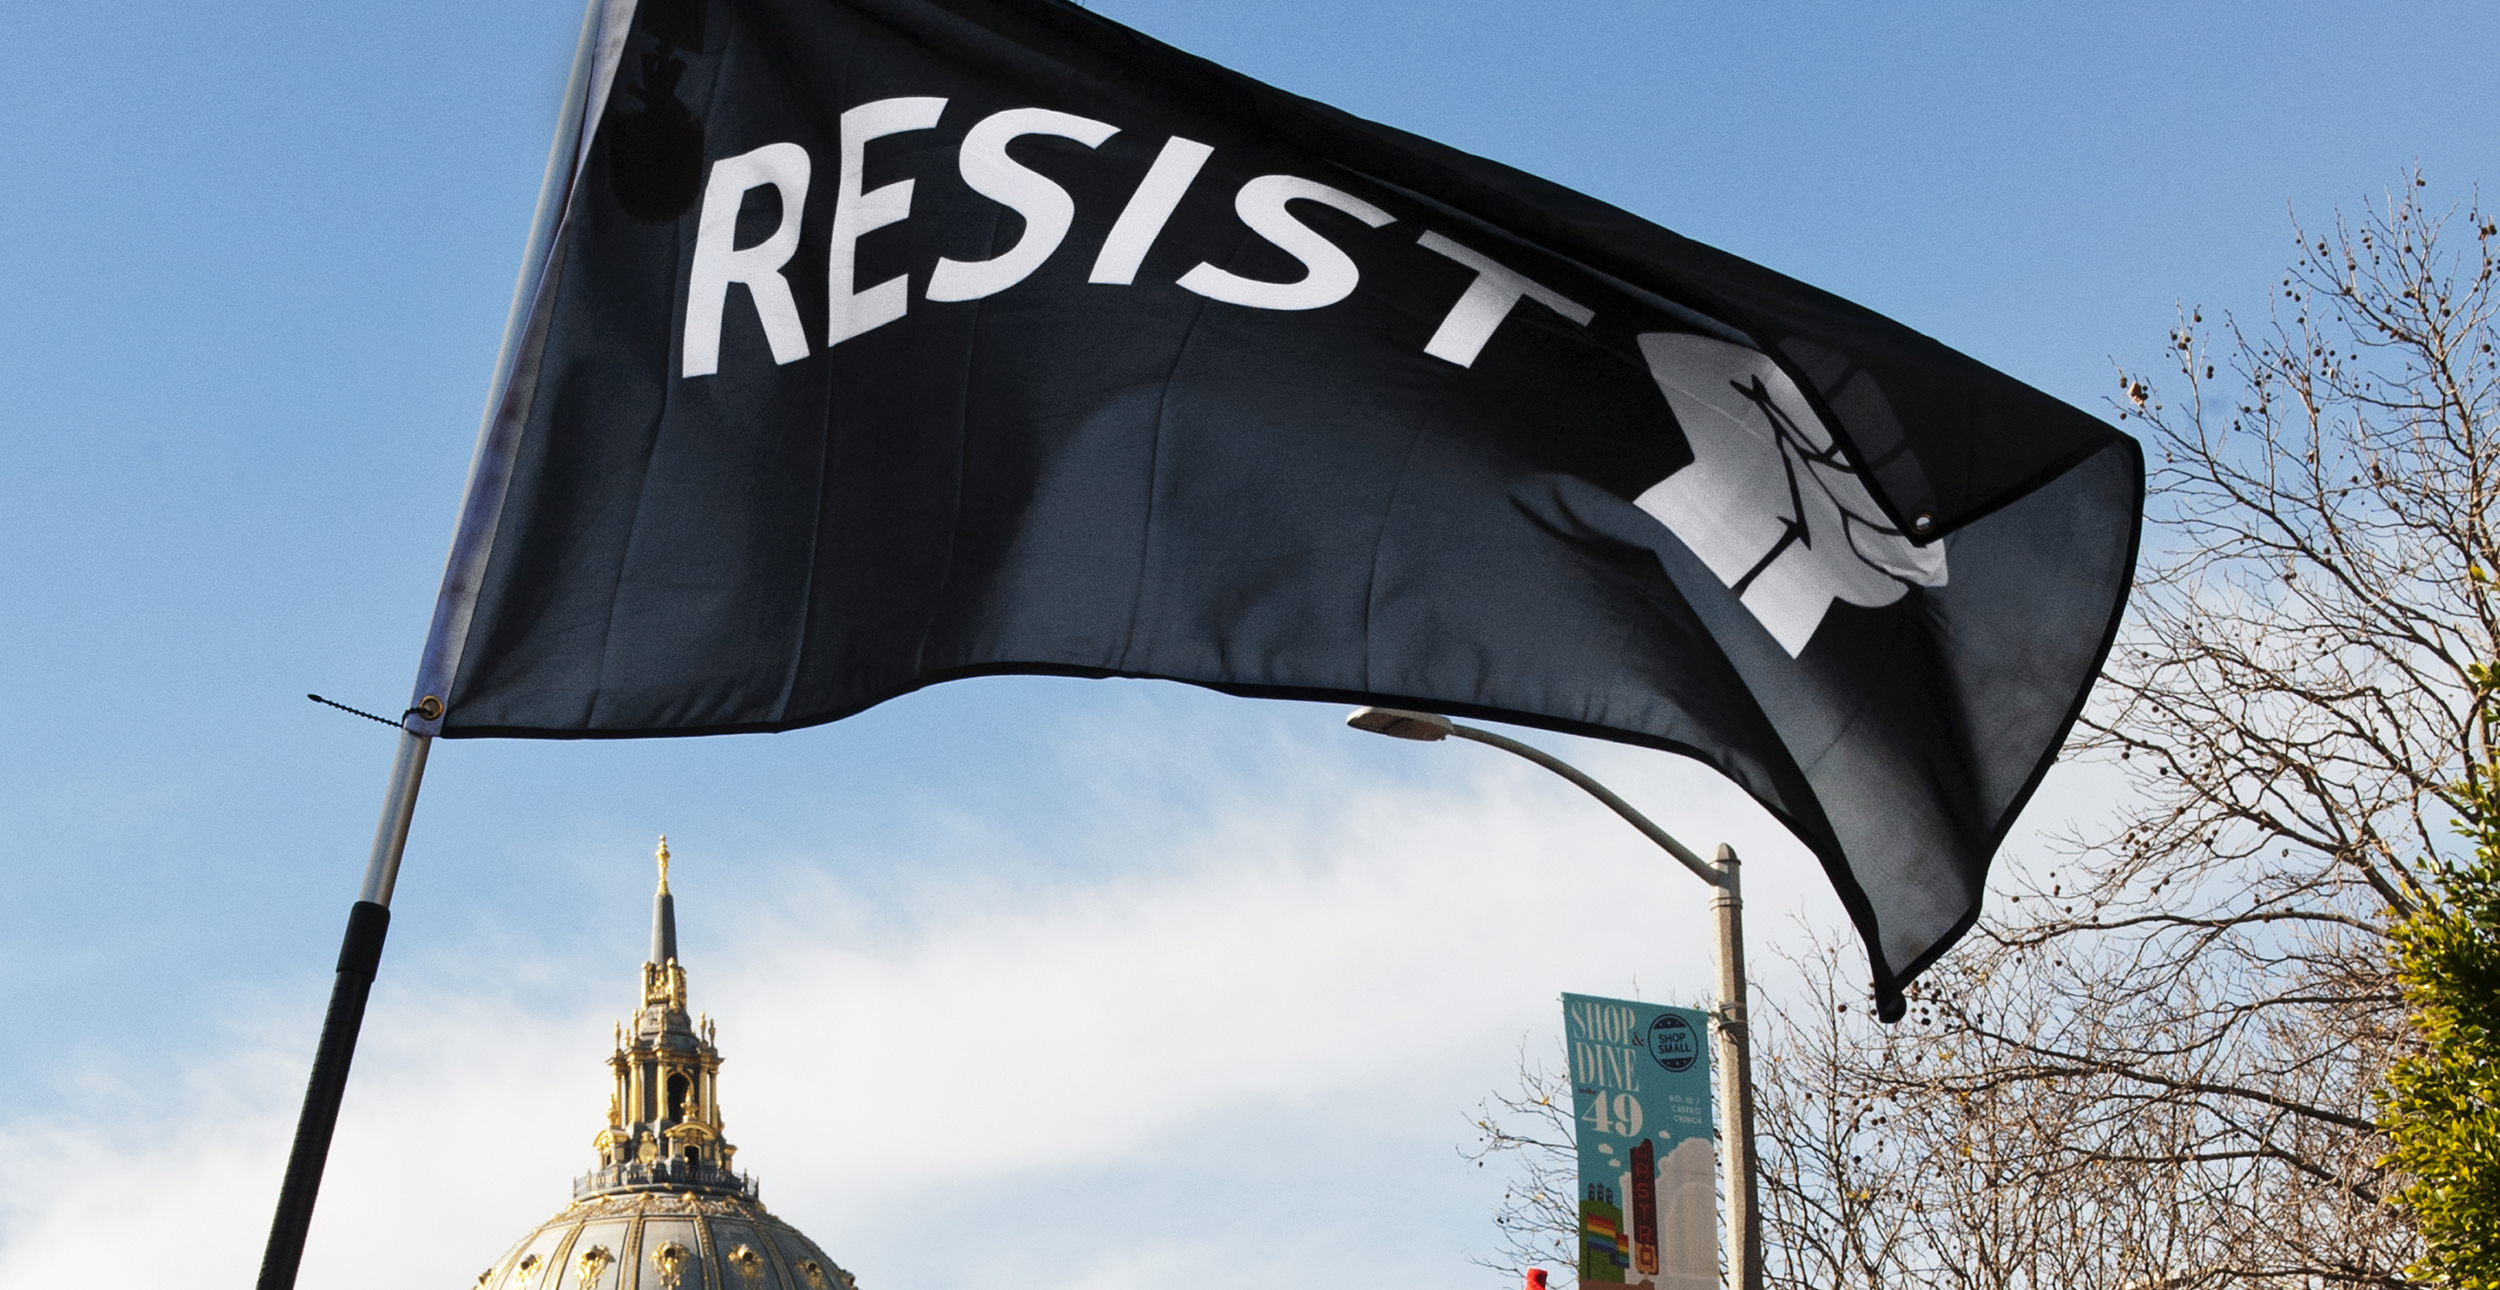 resist flag with SF City Hall building in the background